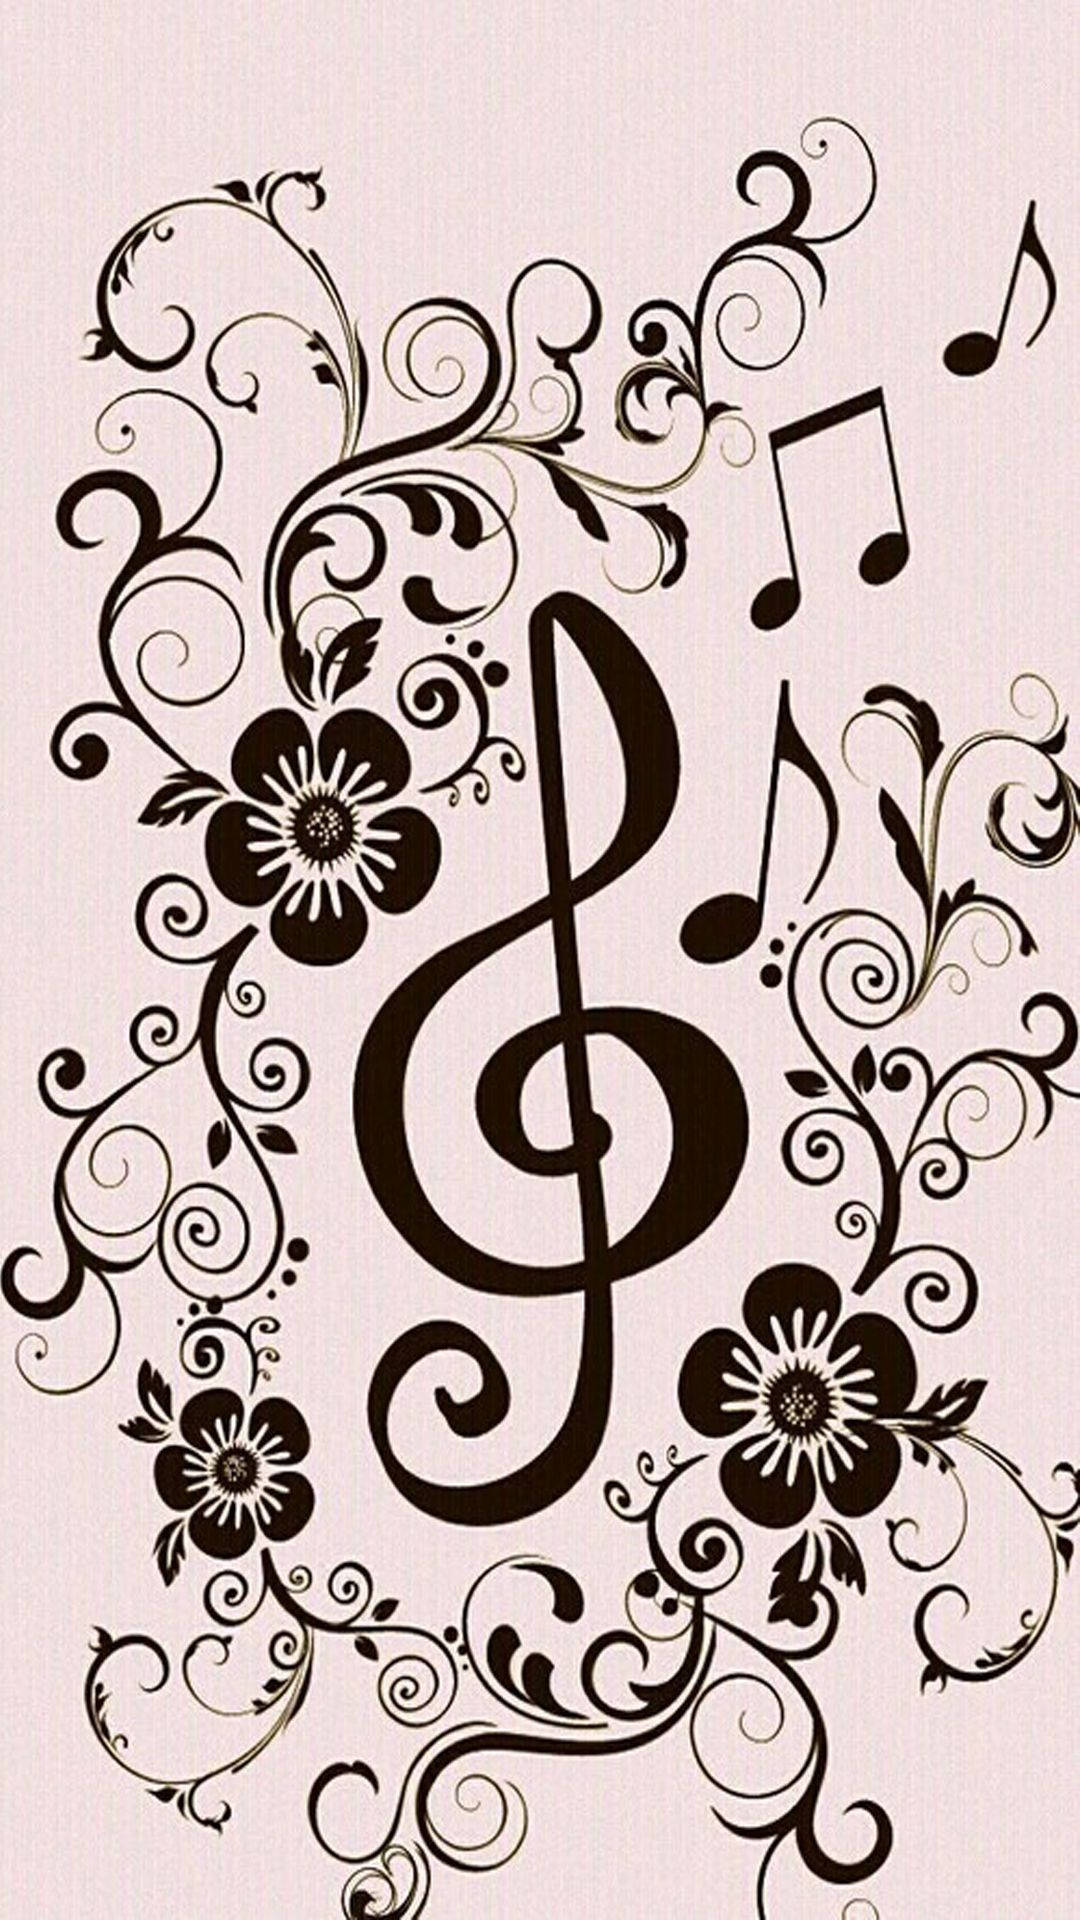 Cute Music Notes Floral Aesthetic